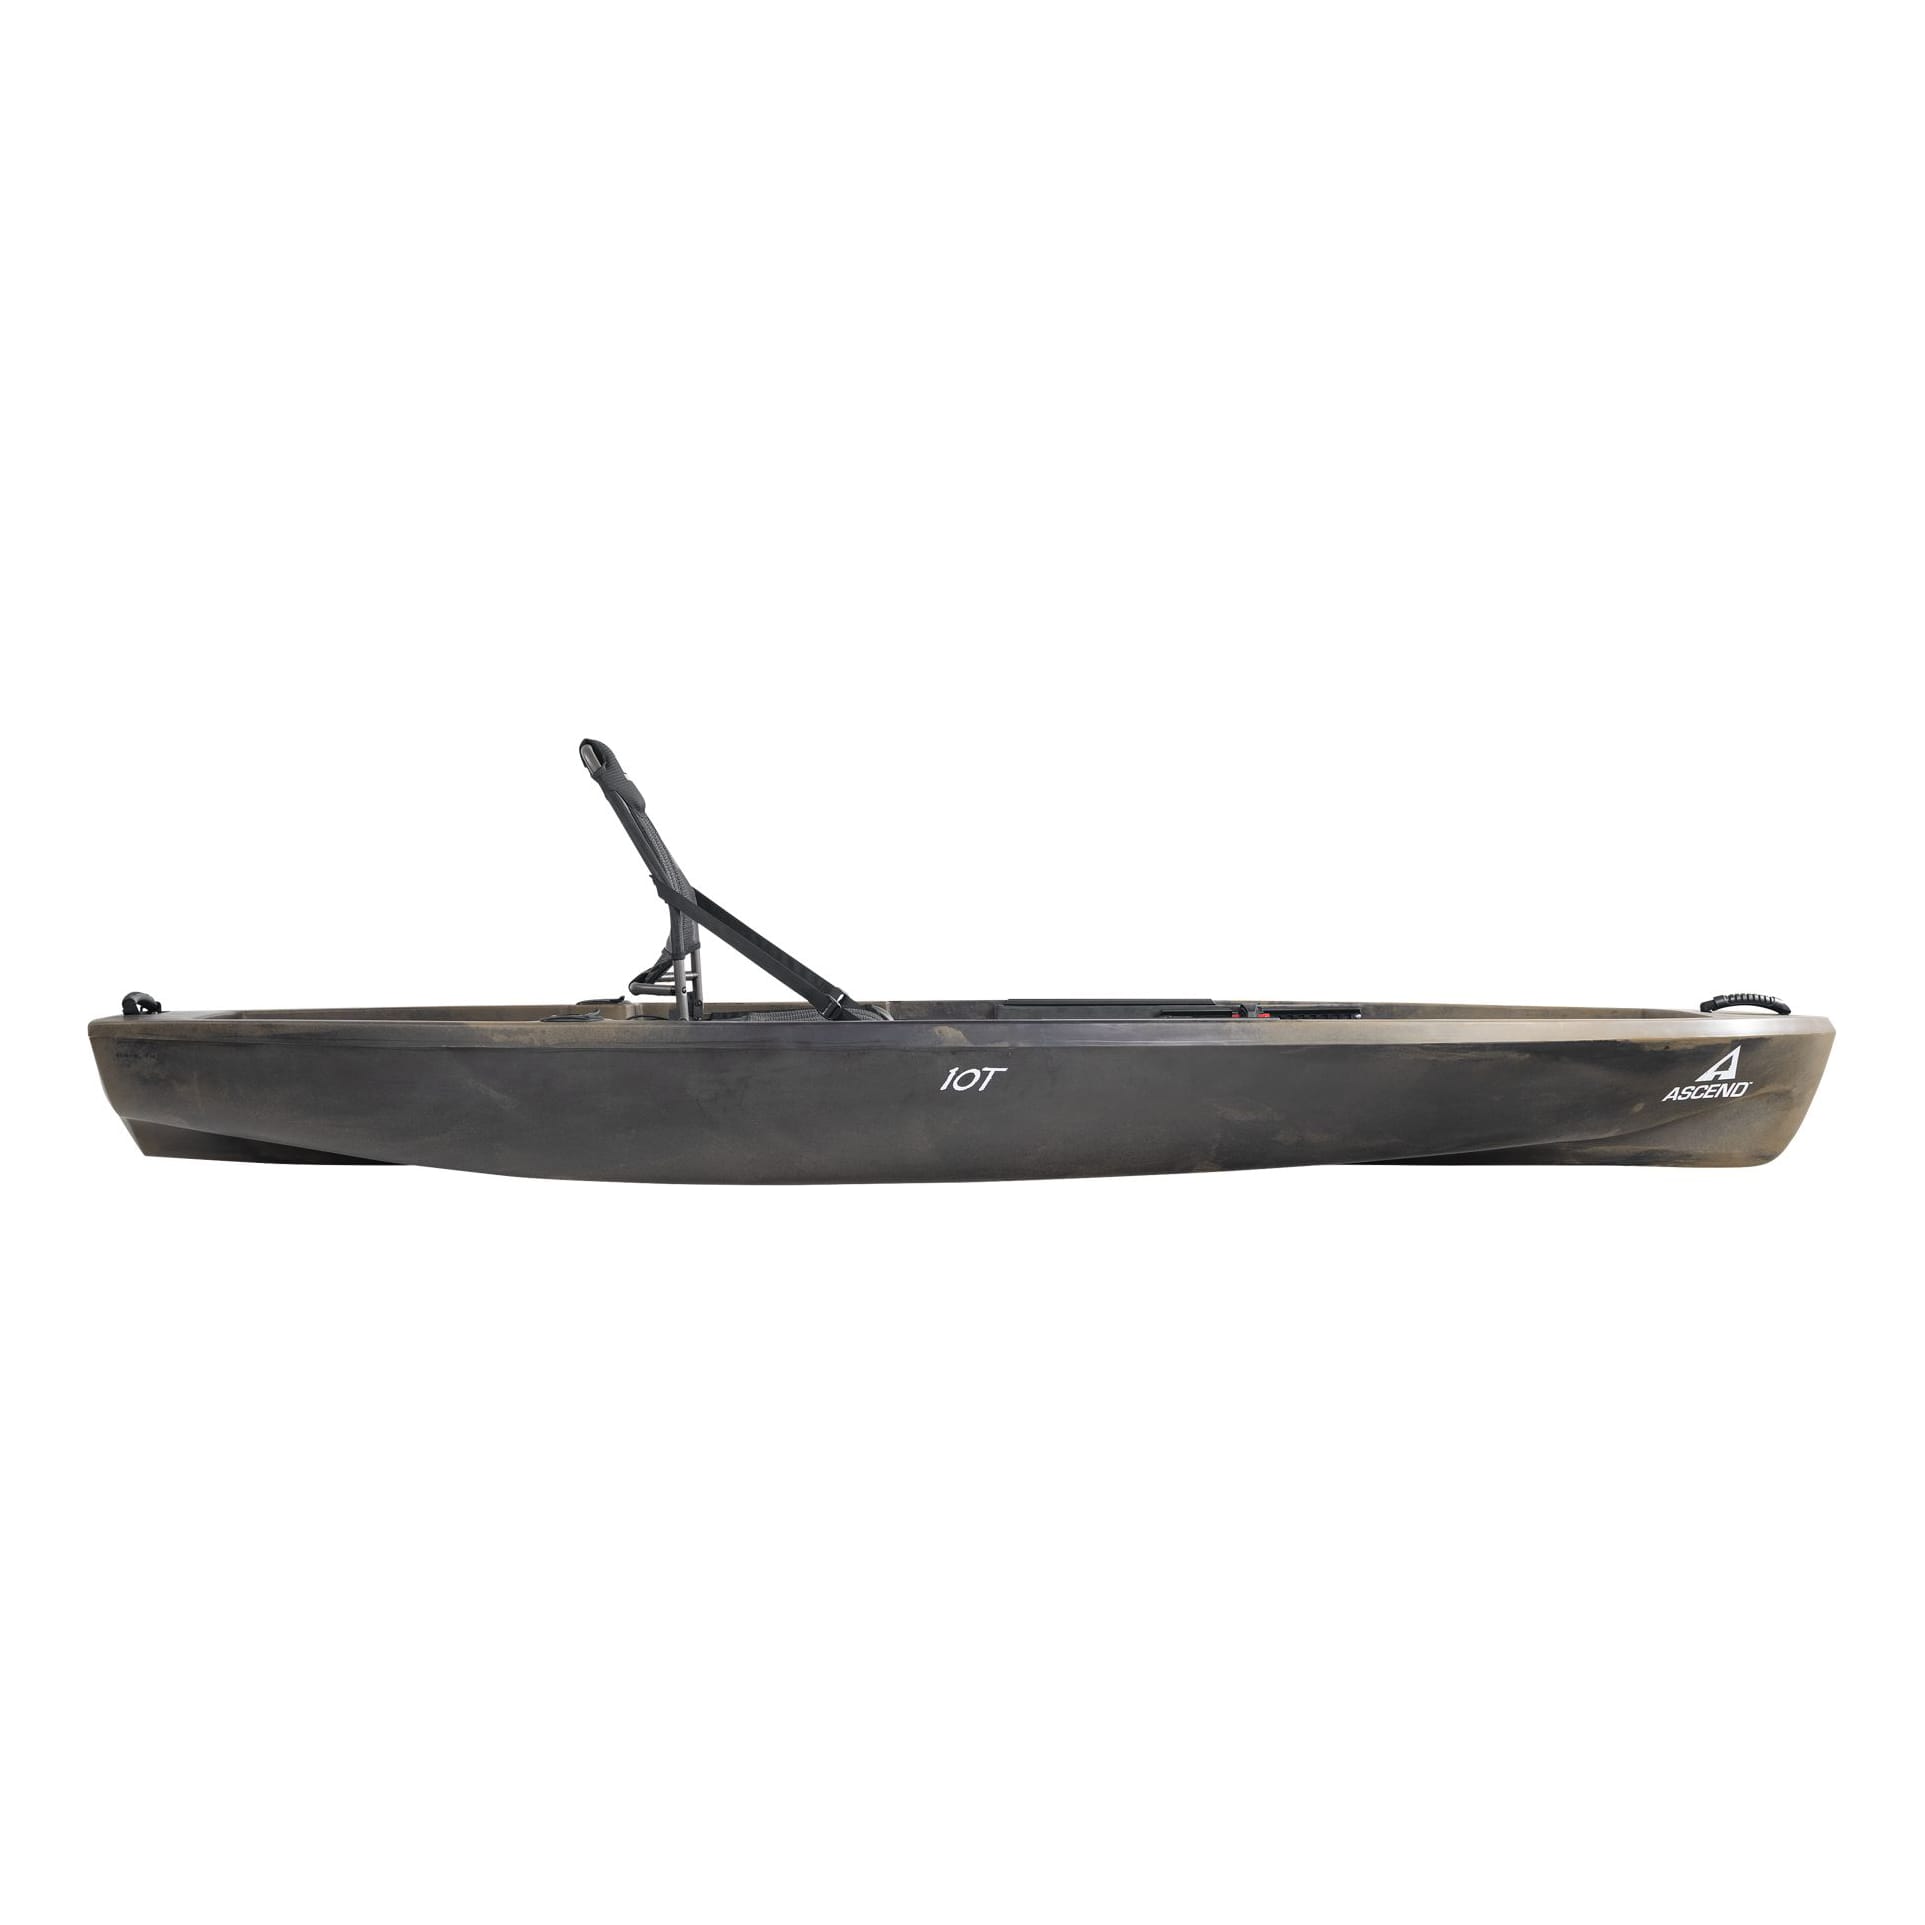 Ascend® 10T Sit-On-Top Kayak with Enhanced Seating System - Camo - Side View